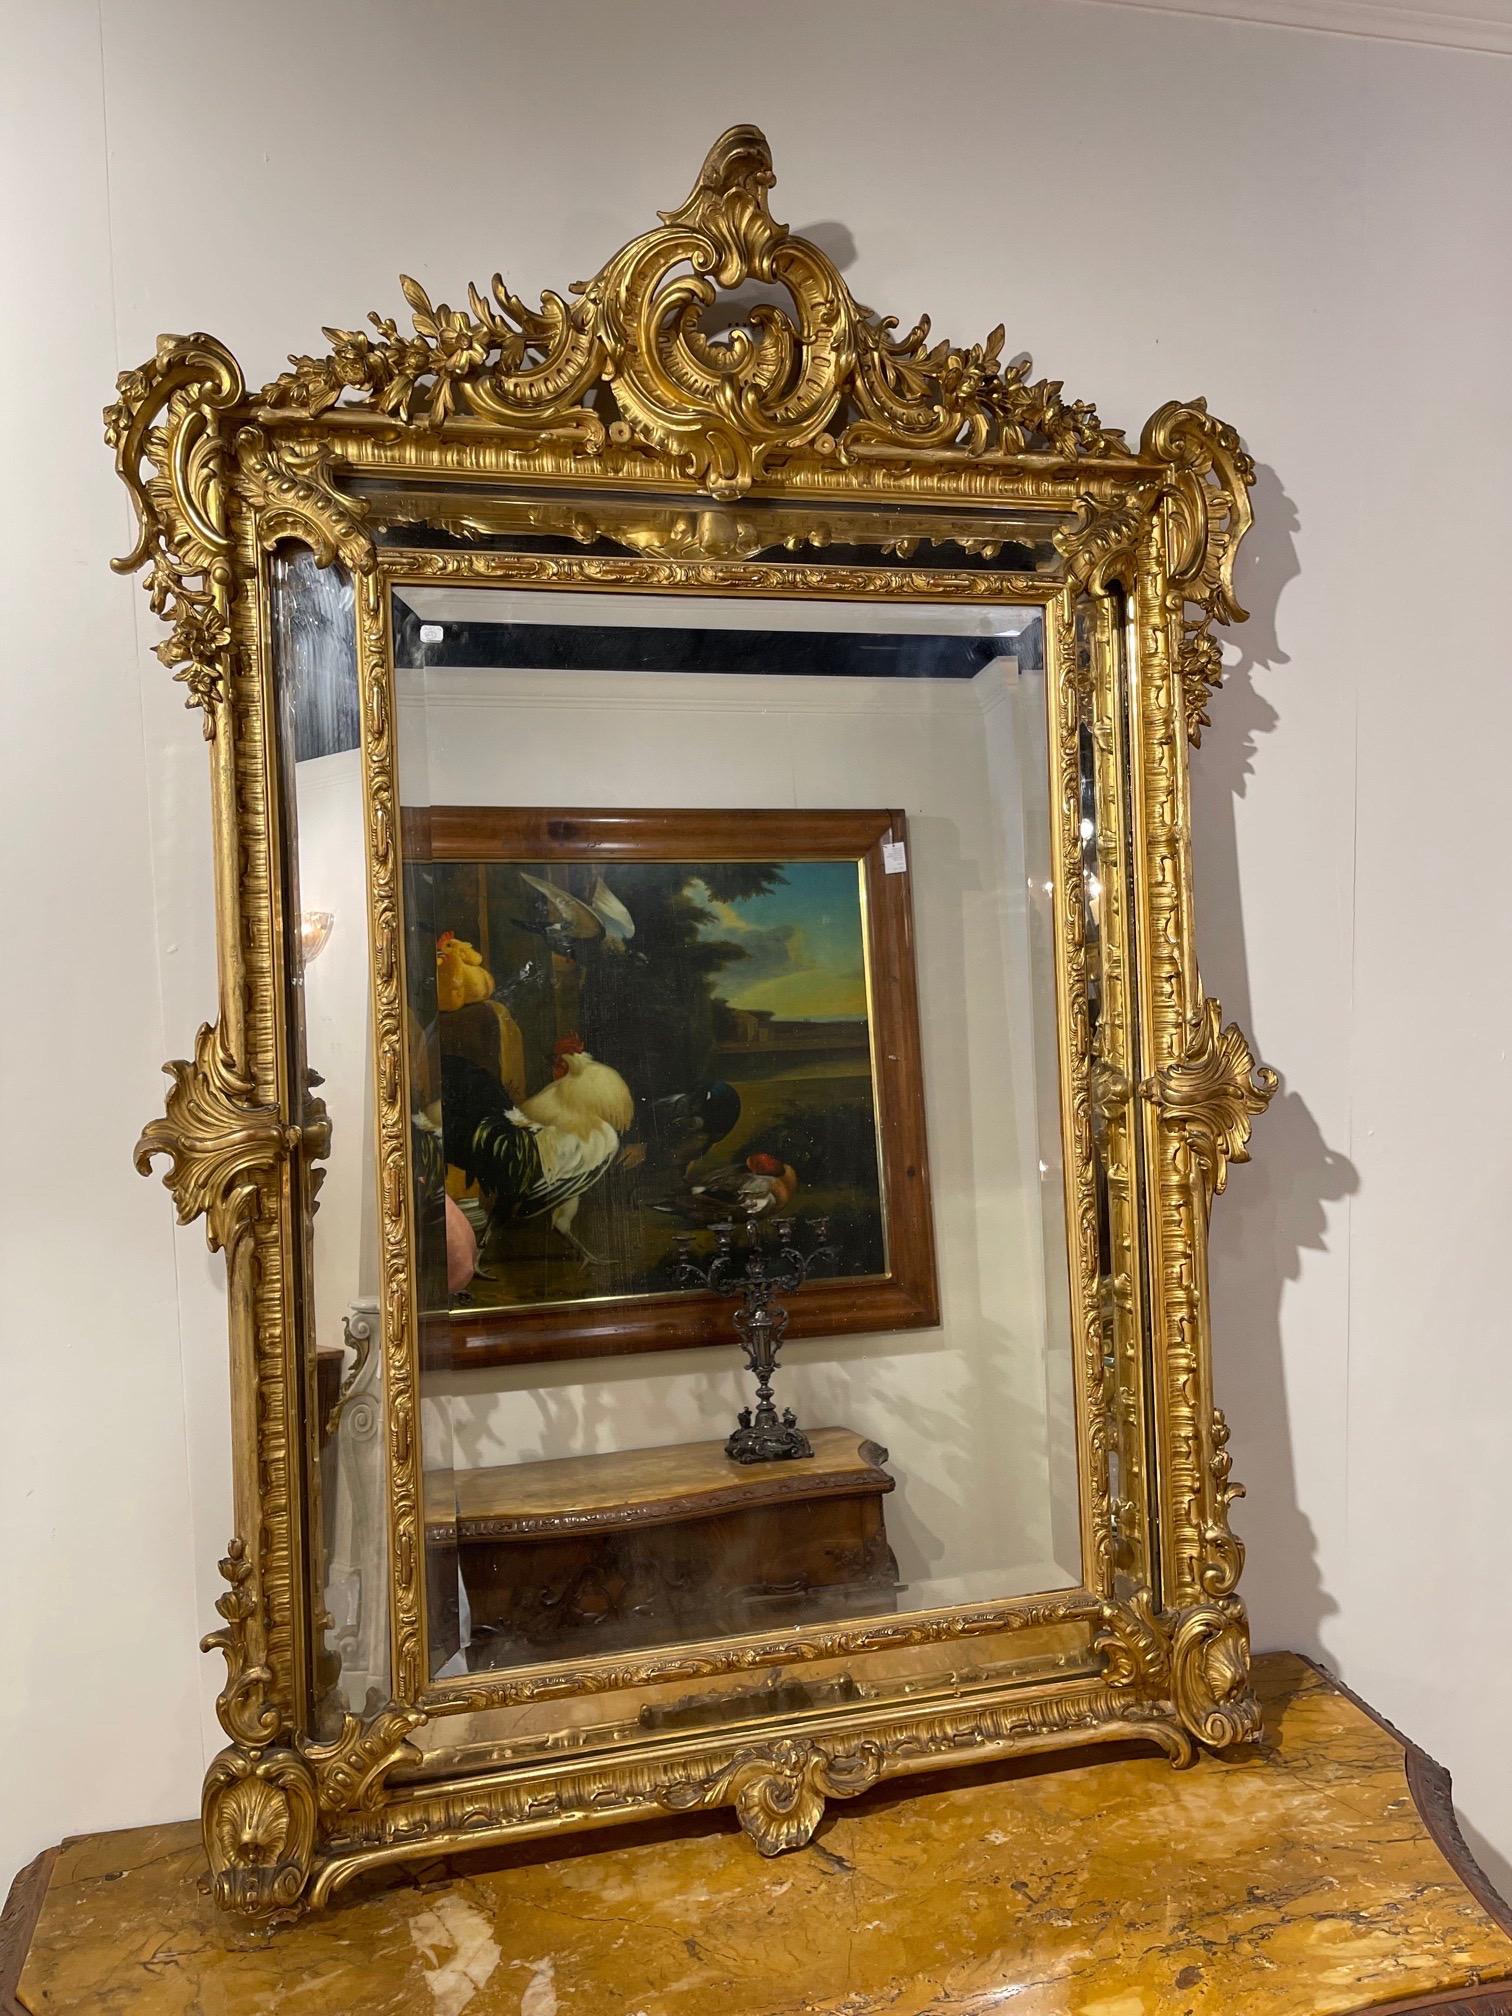 Stunning 19th century French Louis XV style carved and giltwood cushion mirror. Beautiful decorative carvings including an elaborate crest at the top. The piece also has the original beveled glass. Extraordinary!!